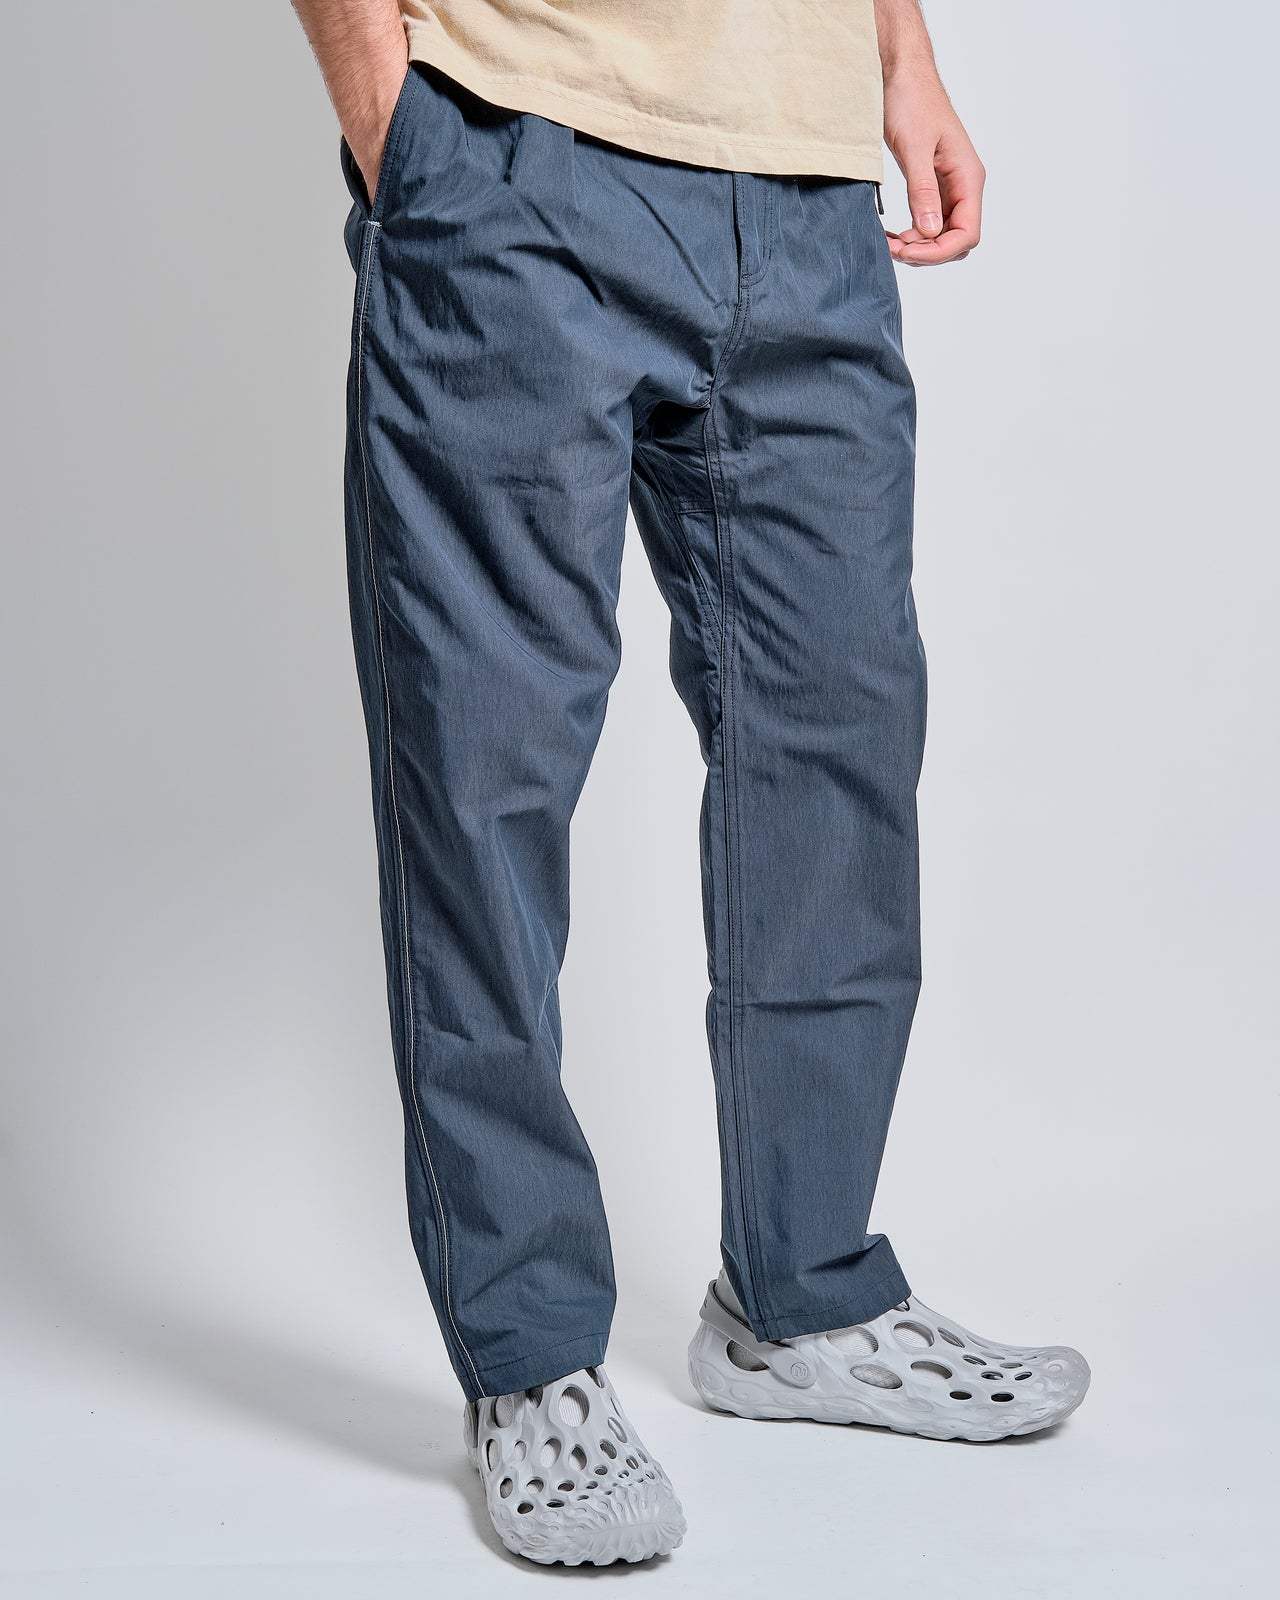 NYCO Climbing G-Pant in Navy